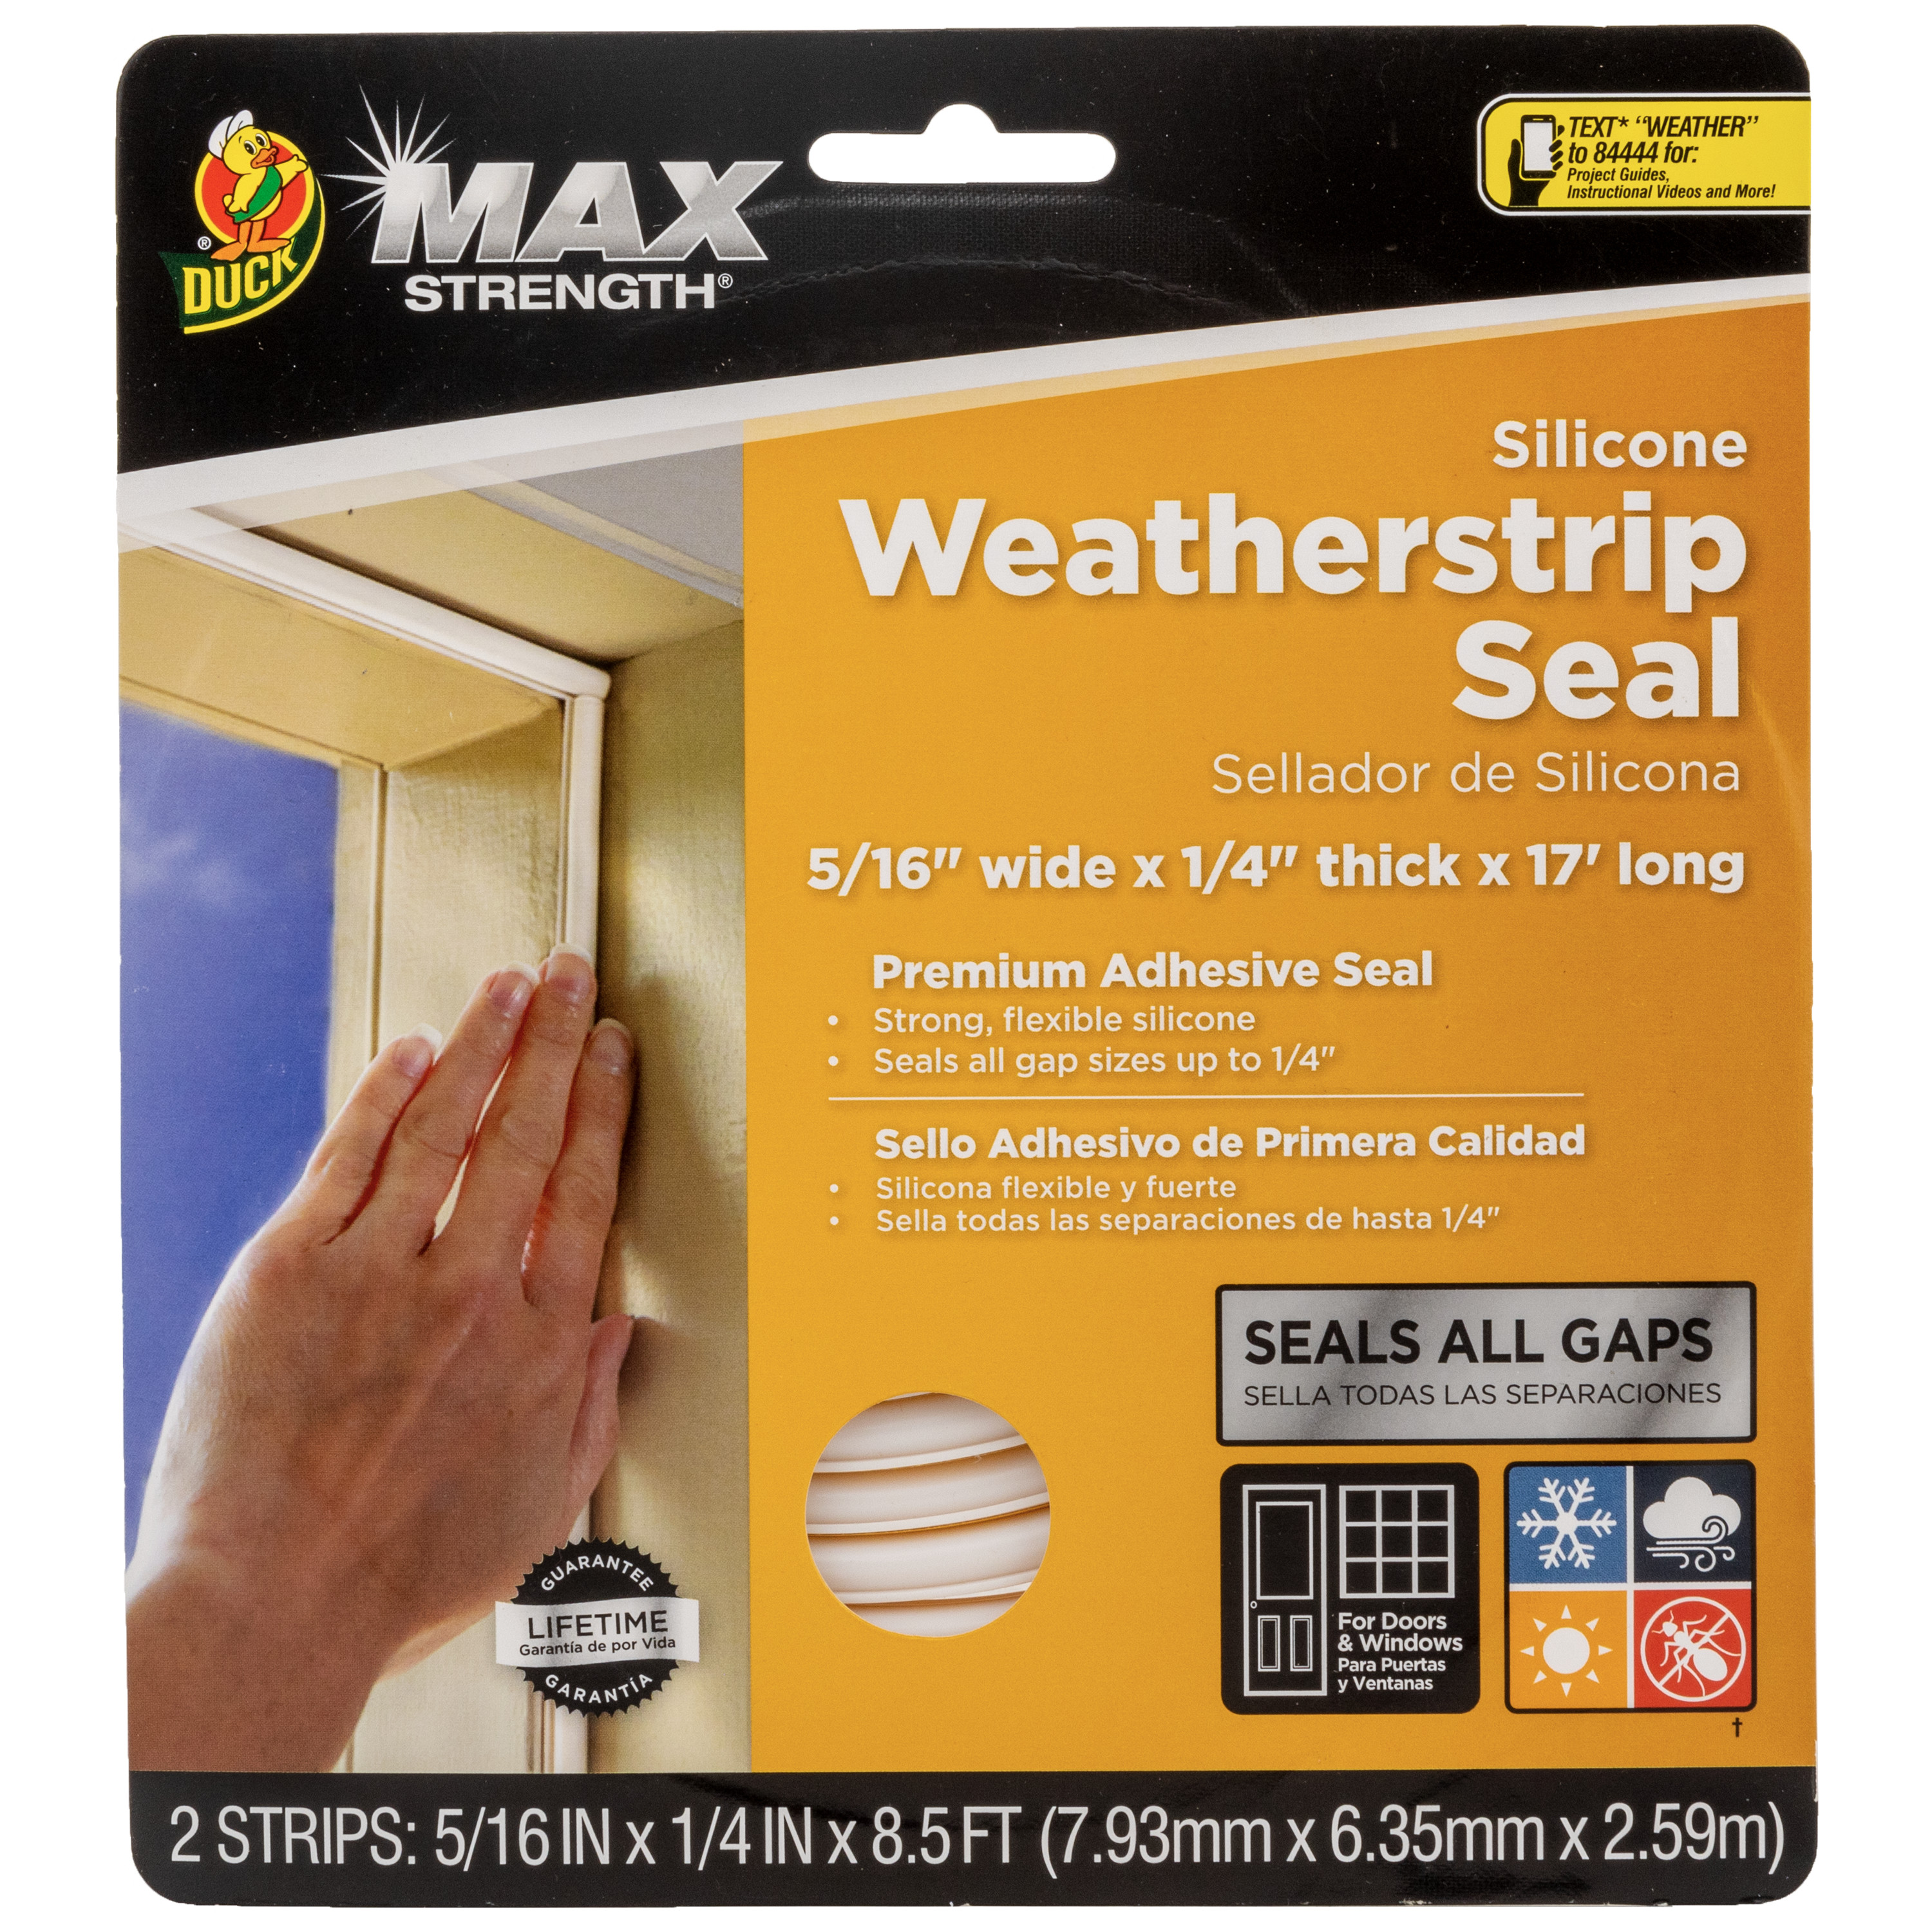 Duck Max Strength White Silicone 17 ft. Weatherstrip Seal - image 3 of 11